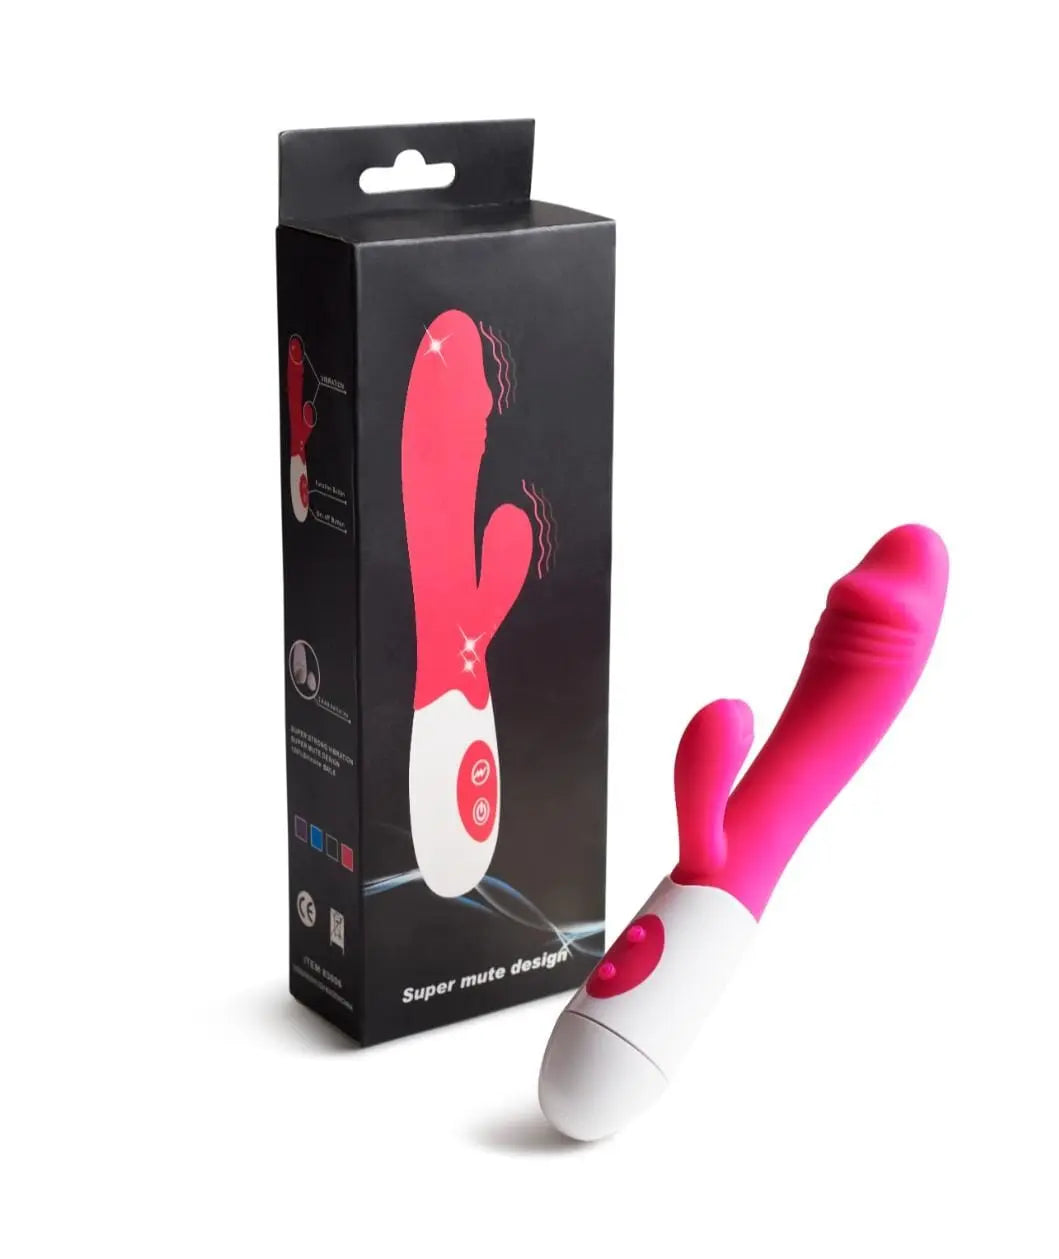 Sex store Gizmoswala sex toys, condoms, sexy lingerie, Lubricant